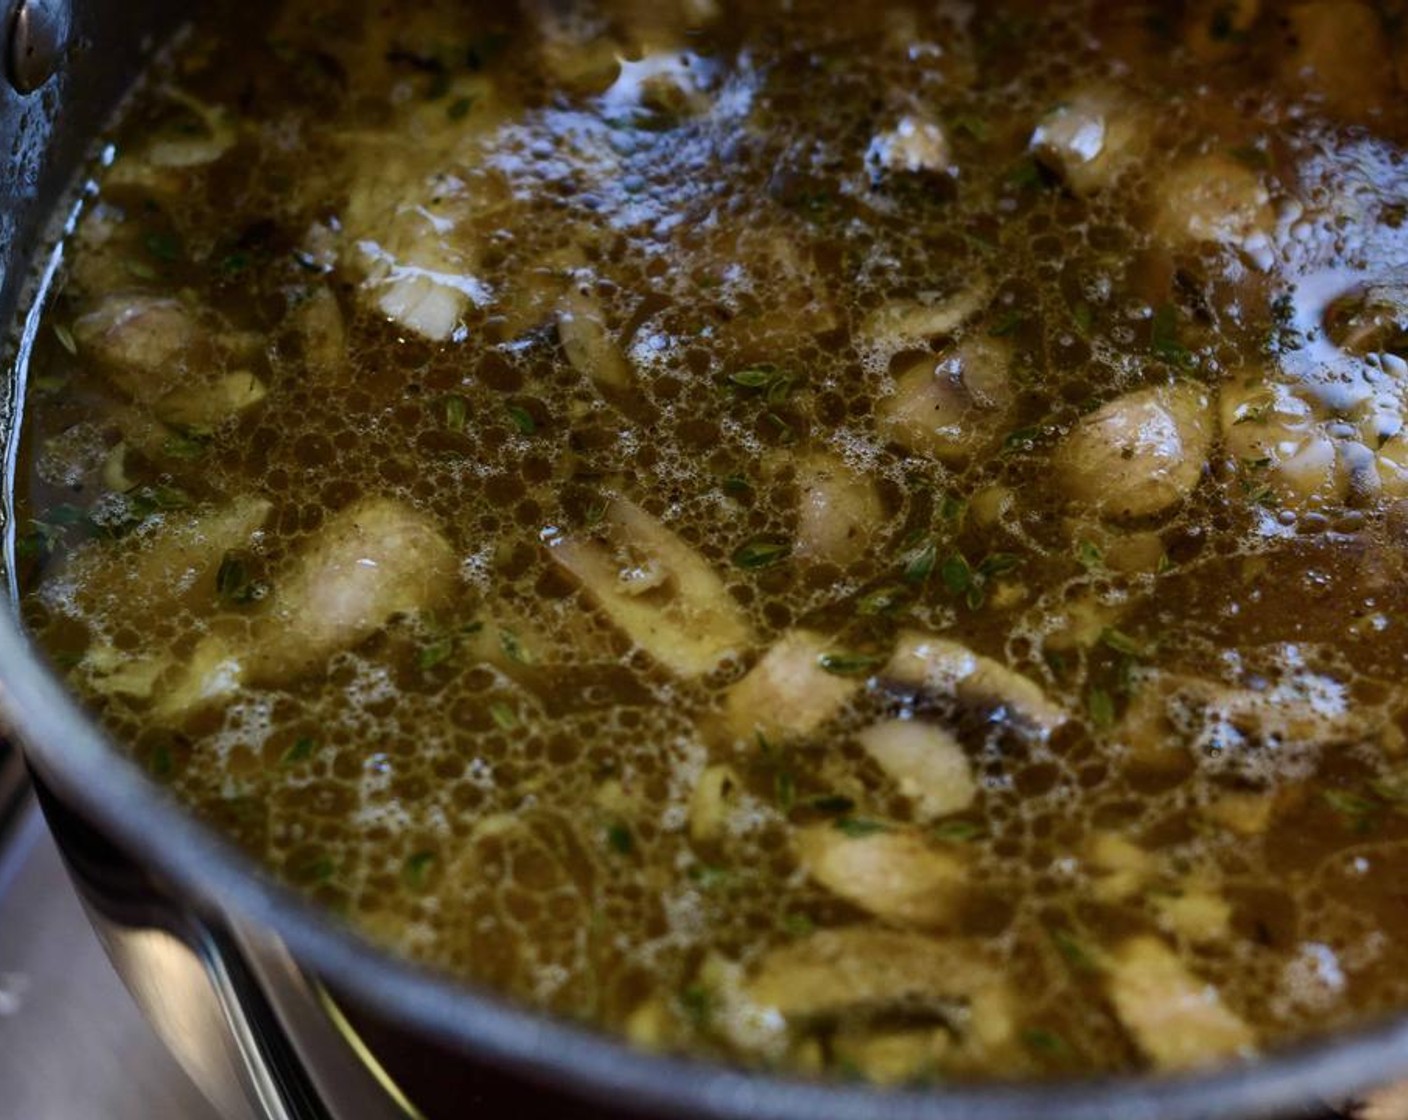 step 5 Fry on high for 5 minutes, tossing constantly. Add in the Sherry Wine (3 Tbsp) and simmer until reduced. Add the mushroom mixture into the simmering chicken stock and stir to combine. If using, add in the Stock Cube (1) and the shredded Roasted Chicken (to taste).